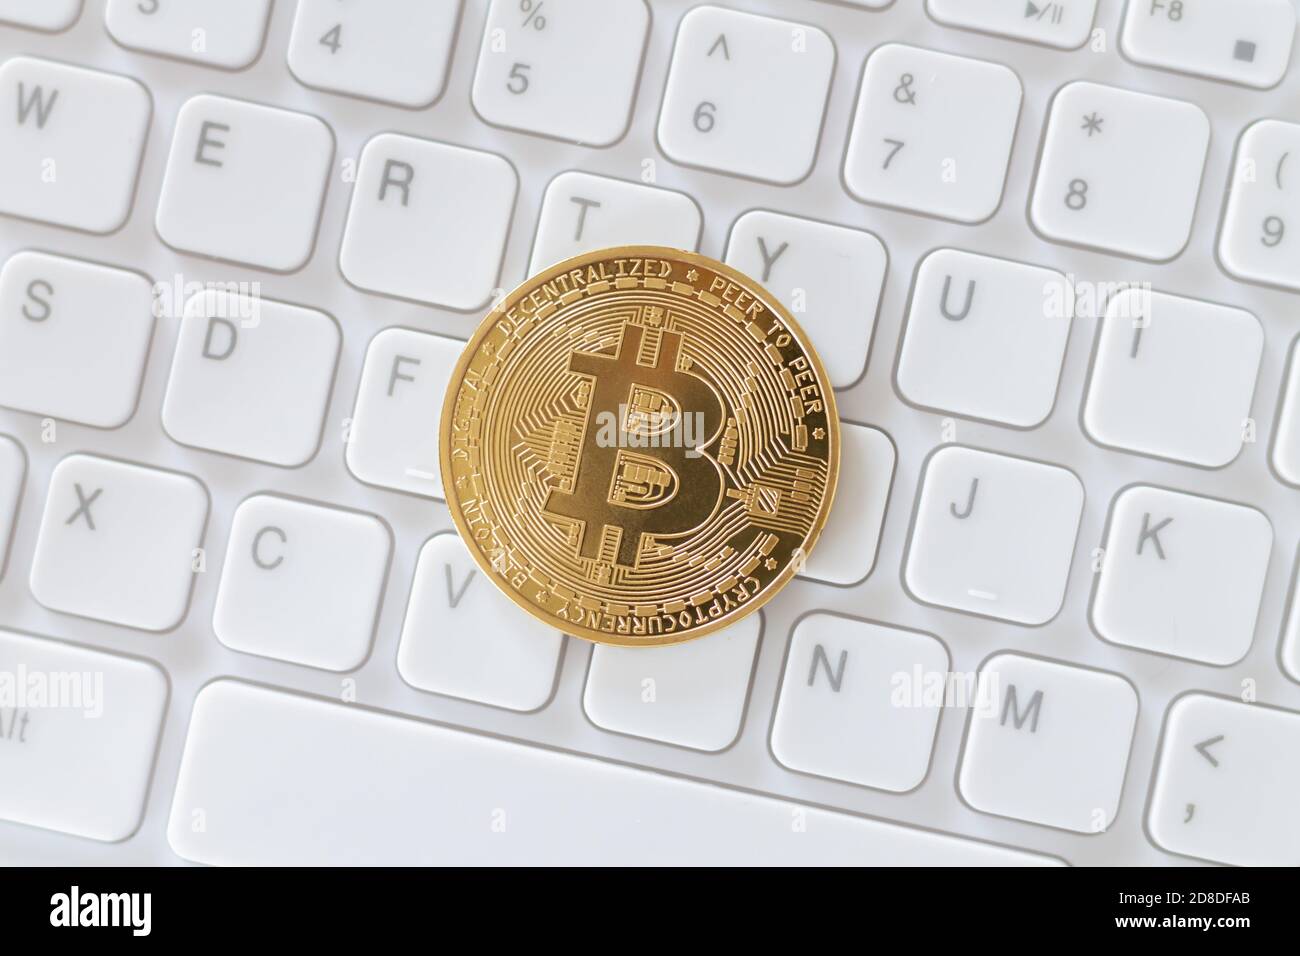 Cryptocurrency gold bitcoin on white keyboard. Virtual cryptocurrency concept Stock Photo